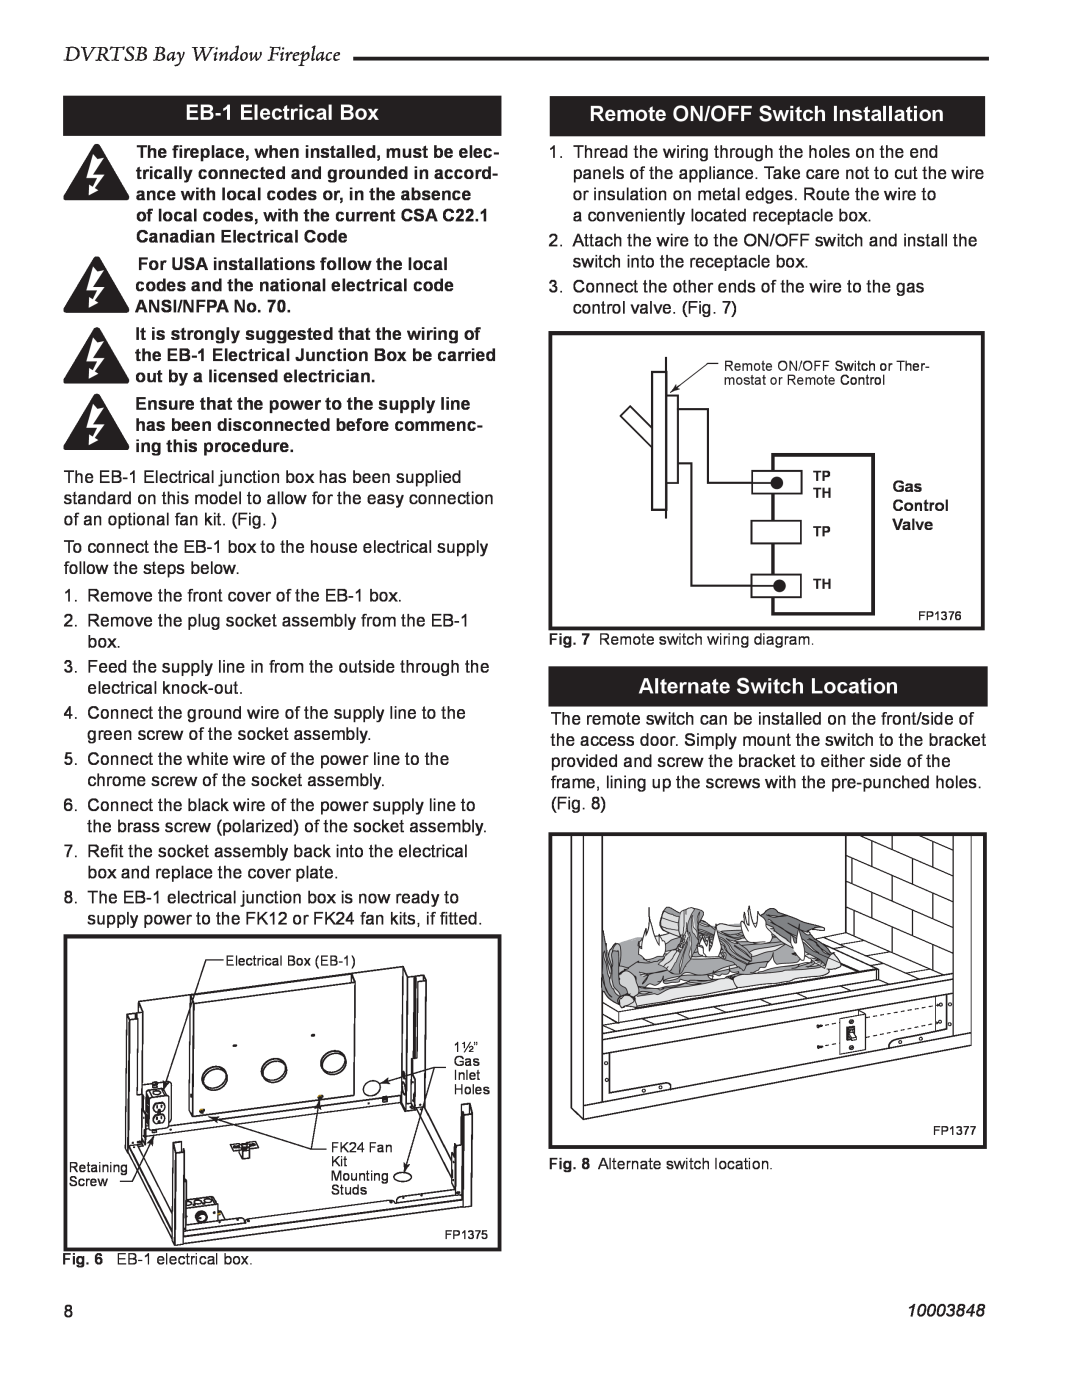 Vermont Casting DVRTSB manual EB-1Electrical Box, Remote ON/OFF Switch Installation, Alternate Switch Location, 10003848 